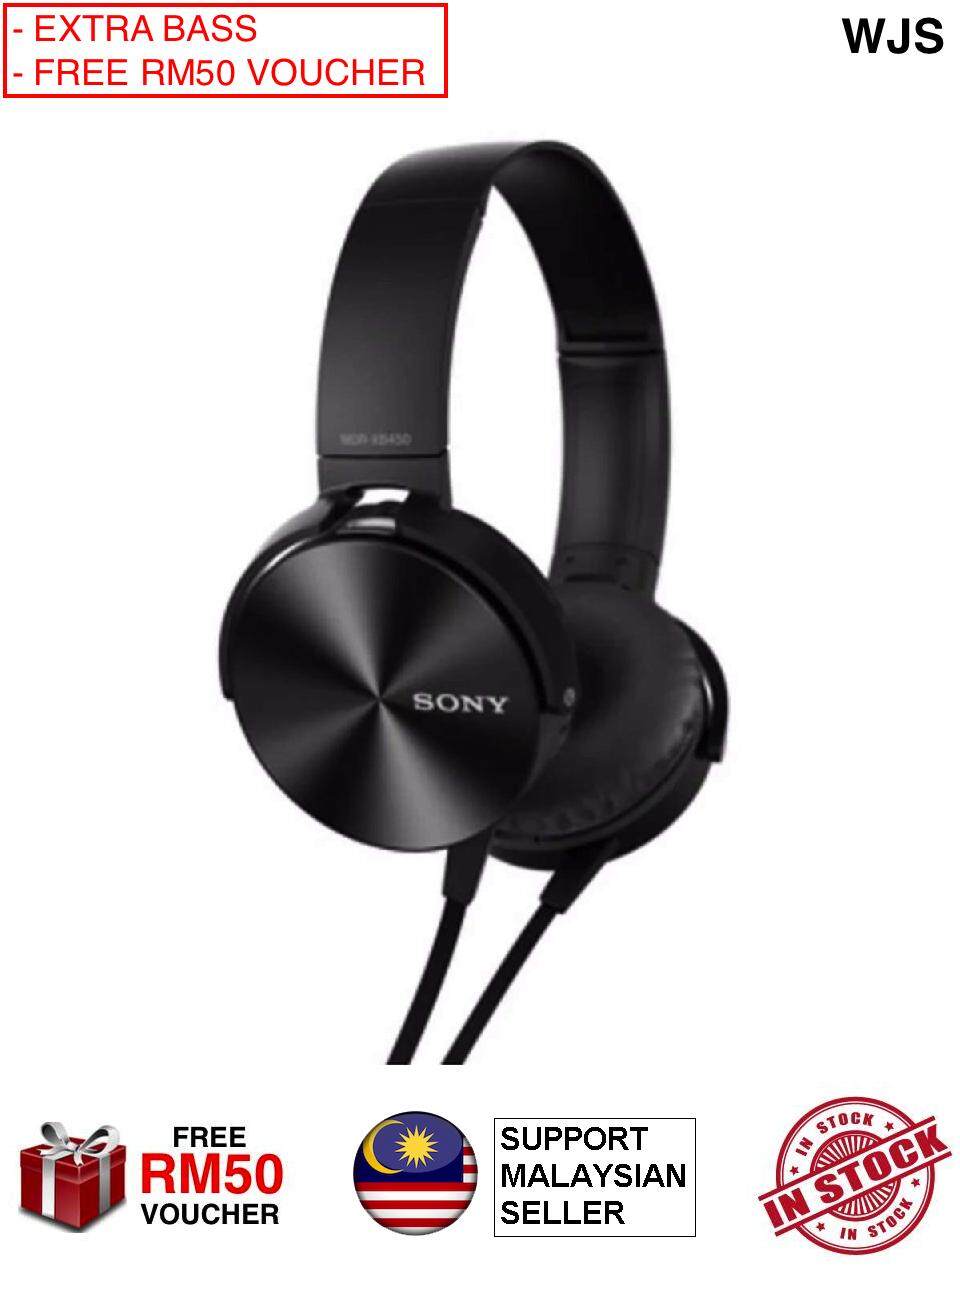 (HIGH QUALITY ASSURED) Sony MDR-XB450AP Extra Bass Sony Extra Bass Smartphone Headset Handsfree Headphone Earphone Black Silver Red Blue Gold (FREE RM50 VOUCHER)